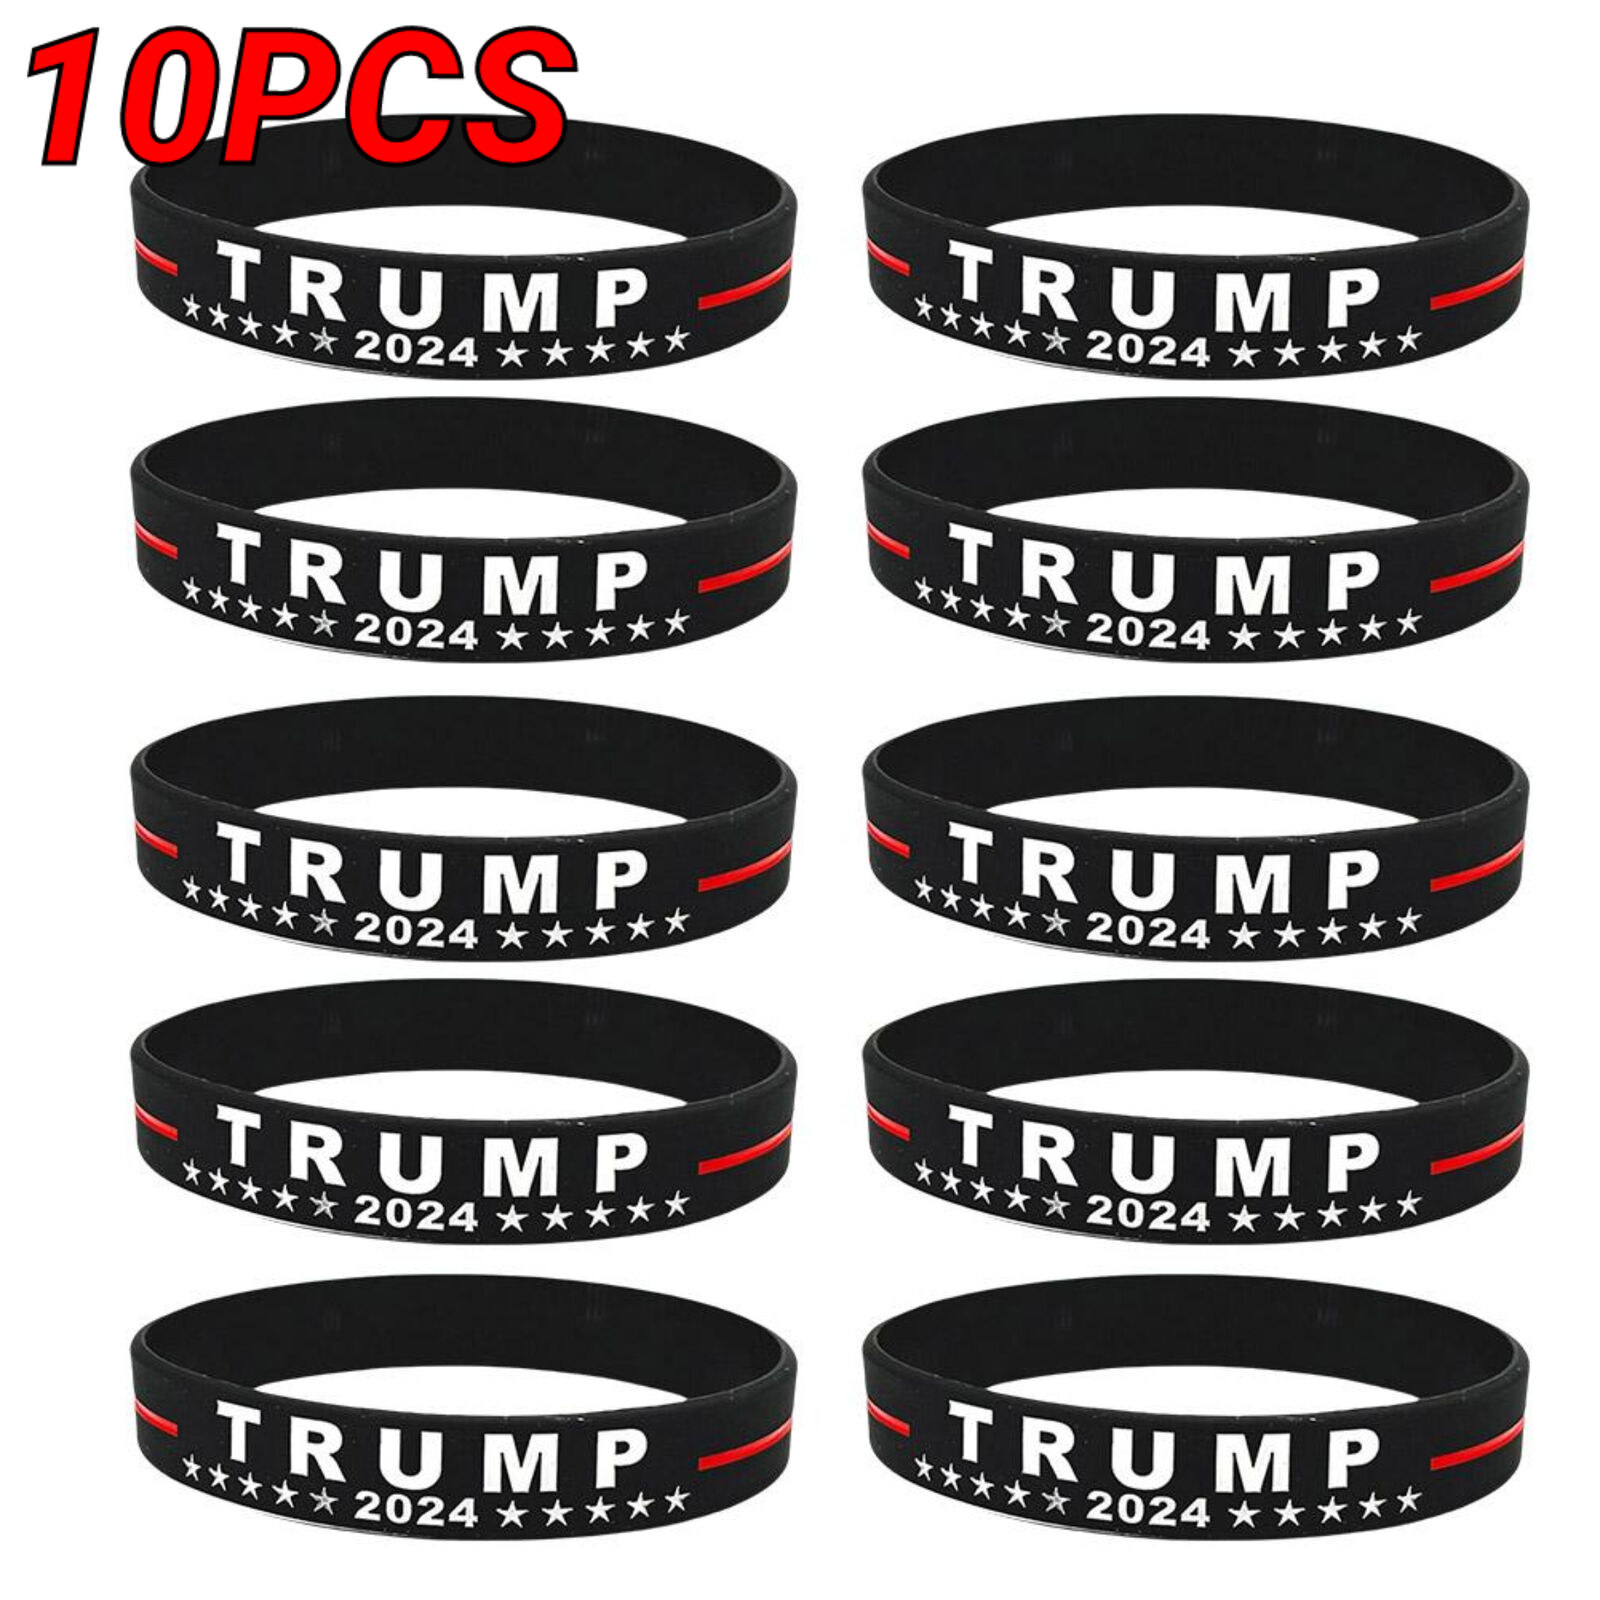 10Pcs Trump 2024 Silicone Bracelet Party Favor Keep America Great Wristband *